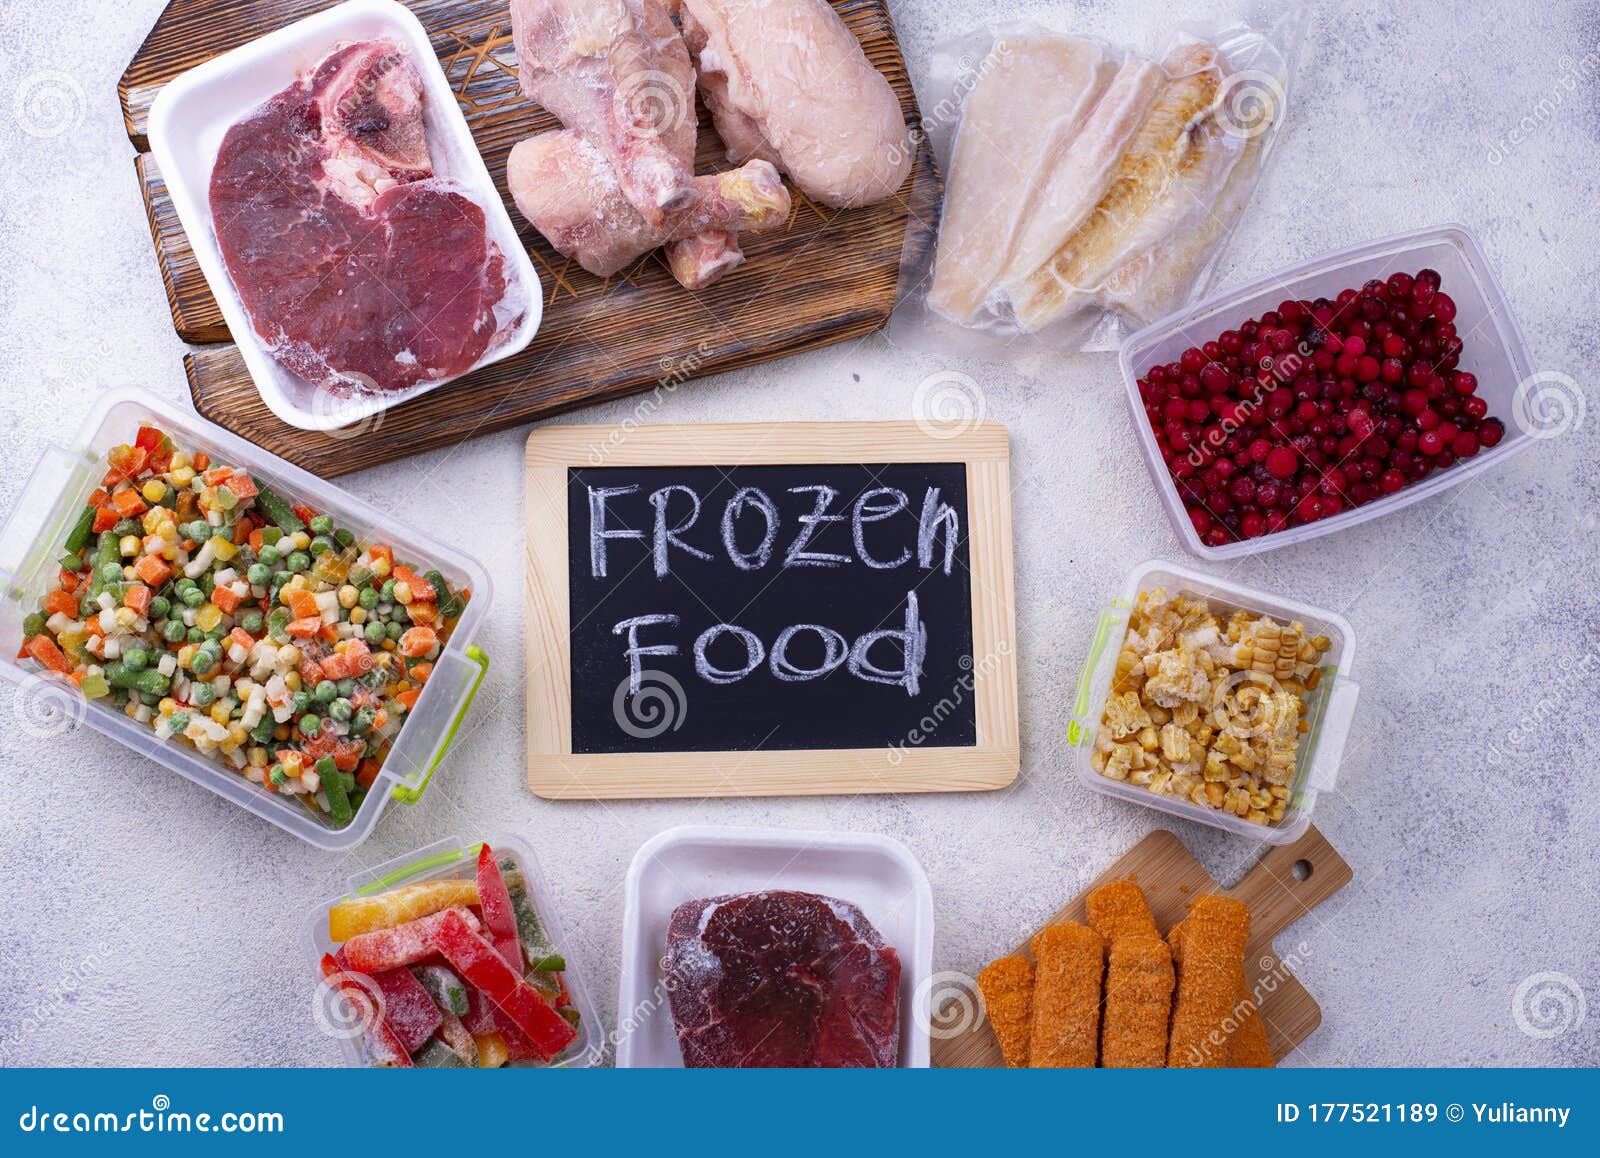 Set of Various Frozen Stock Image Image of nutrition, chalkboard: 177521189